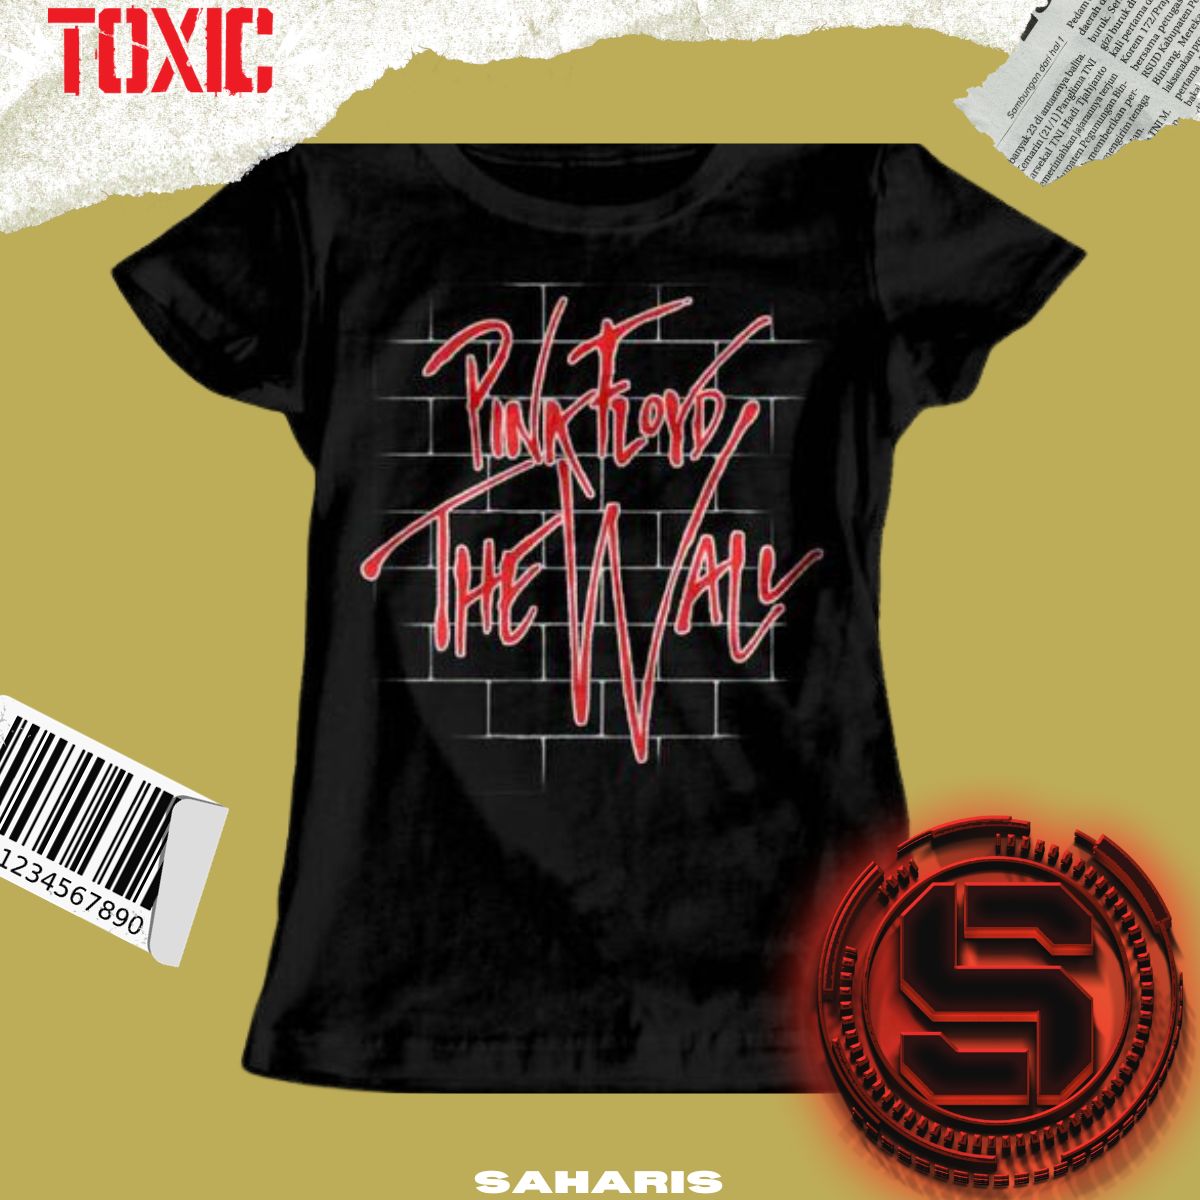 TOXIC BLUSA PINK FLOYD THE WALL